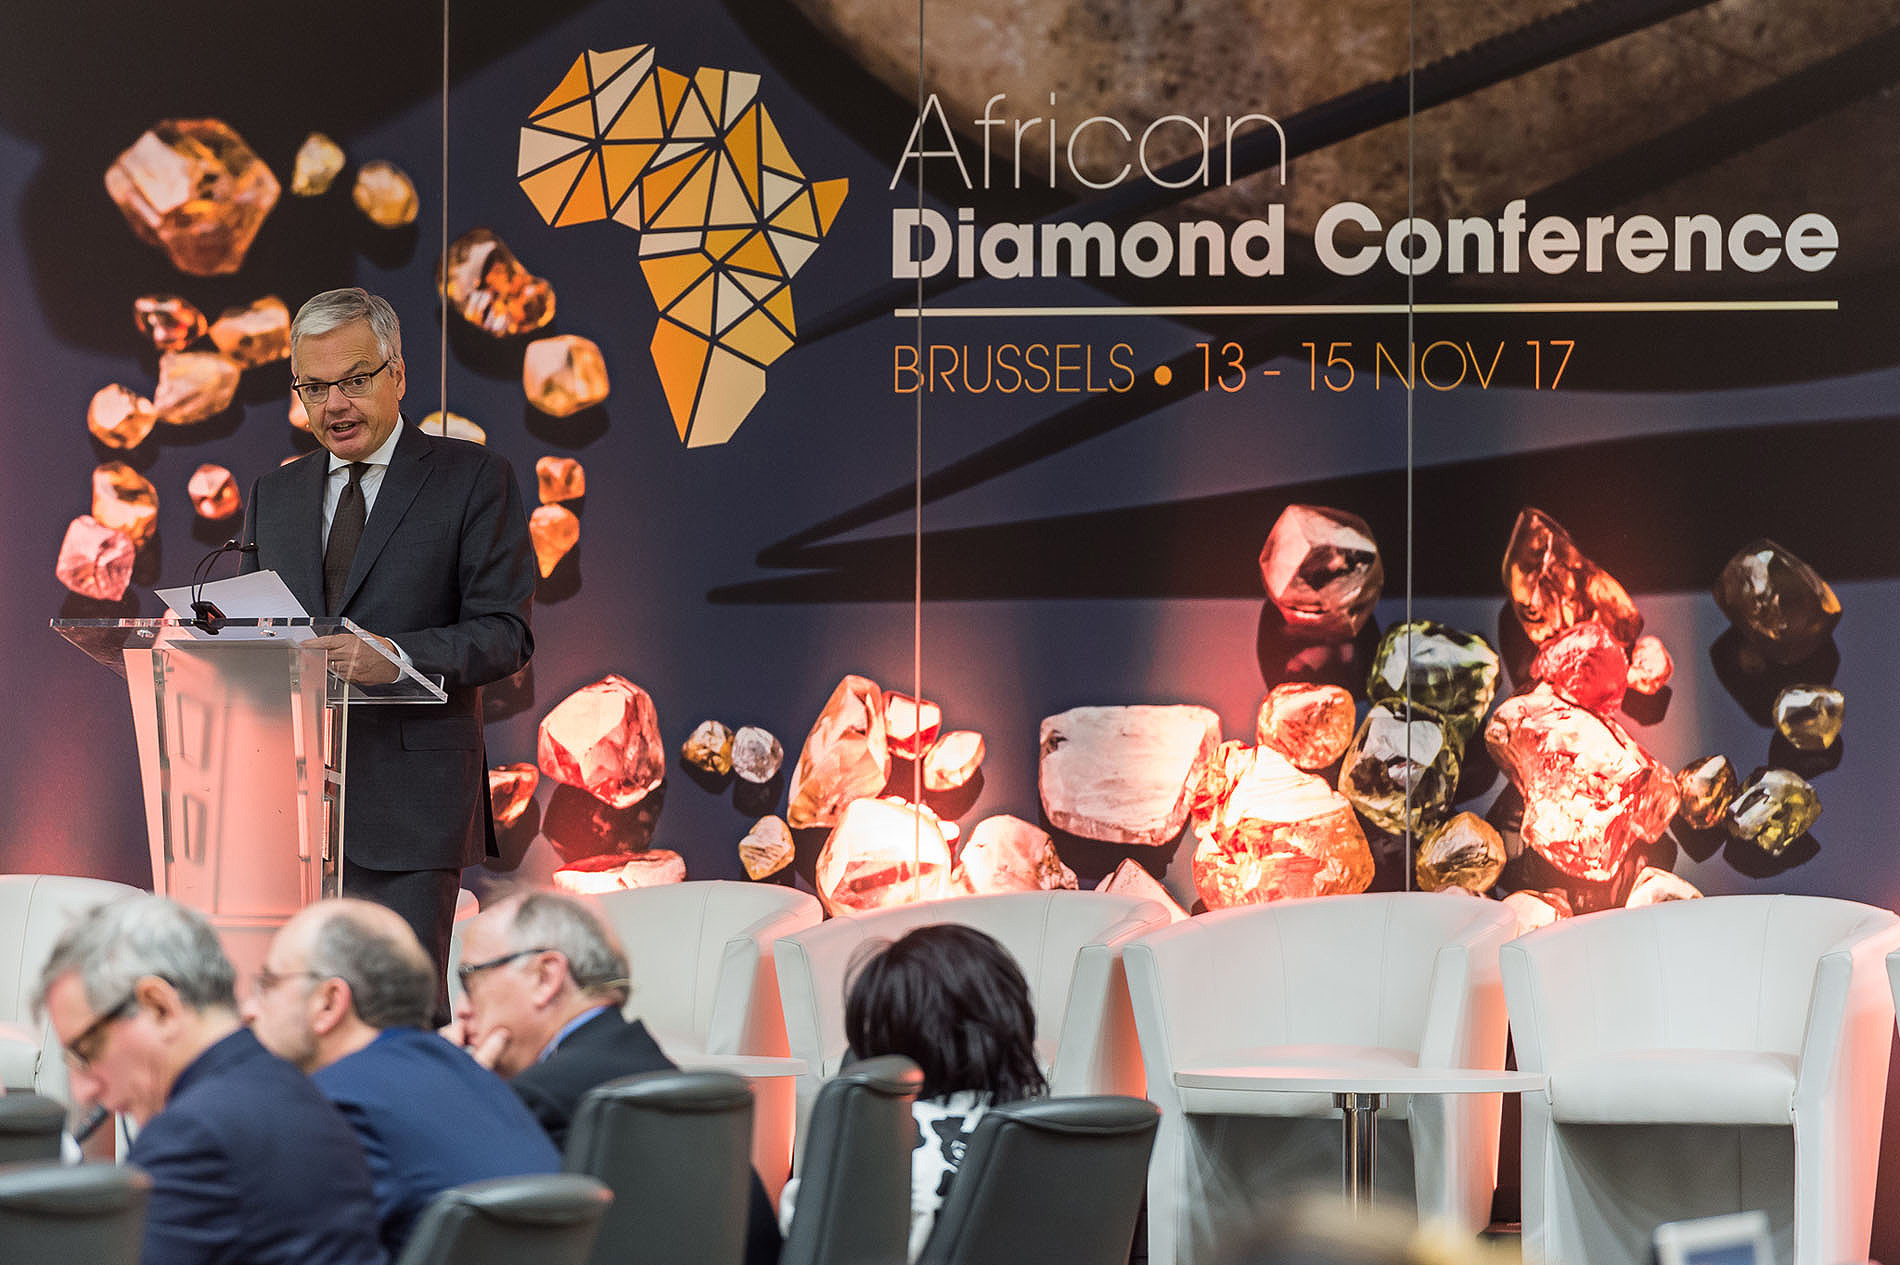 The 2017 African Diamond Conference organized by the Antwerp Diamond World Centre [ADWC].